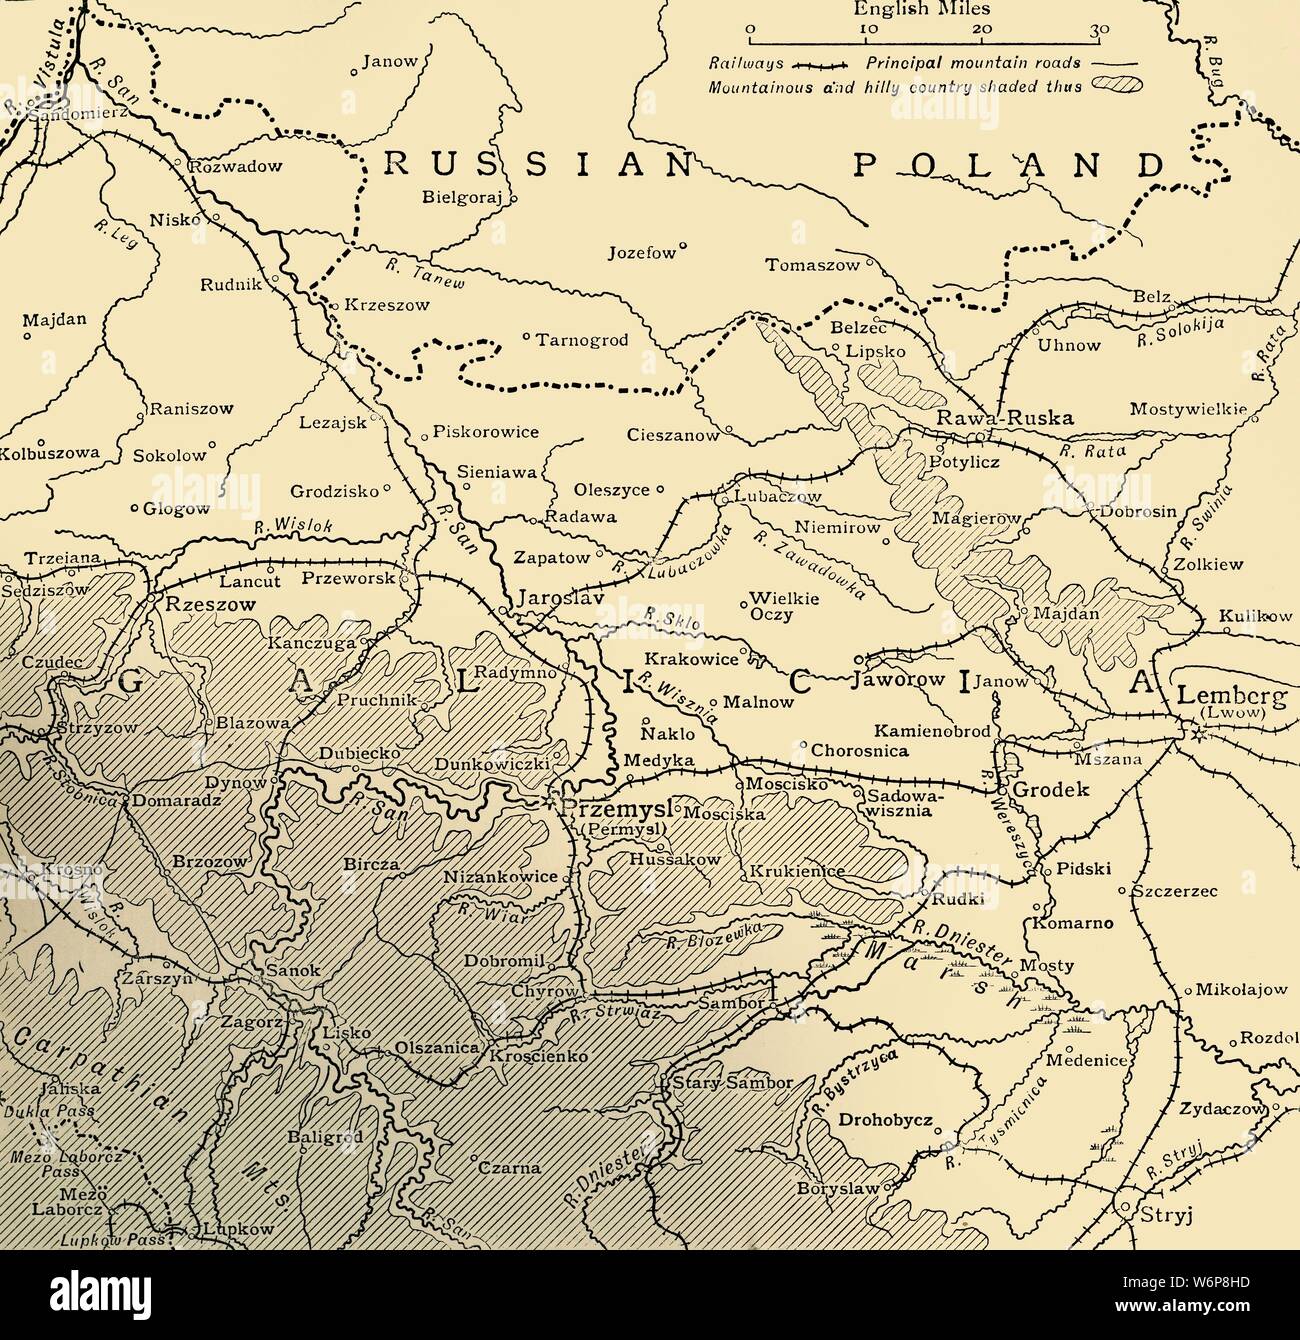 'The Galician Campaign', First World War, c1915, (c1920). 'Map showing Przemysl in relation to Lemberg'. Austrian prisoners of war marched the sixty miles to Lemberg after surrendering to the Russians at the fortress of Przemysl (now in south-eastern Poland). From &quot;The Great World War - A History&quot; Volume III, edited by Frank A Mumby. [The Gresham Publishing Company Ltd, London, c1920] Stock Photo